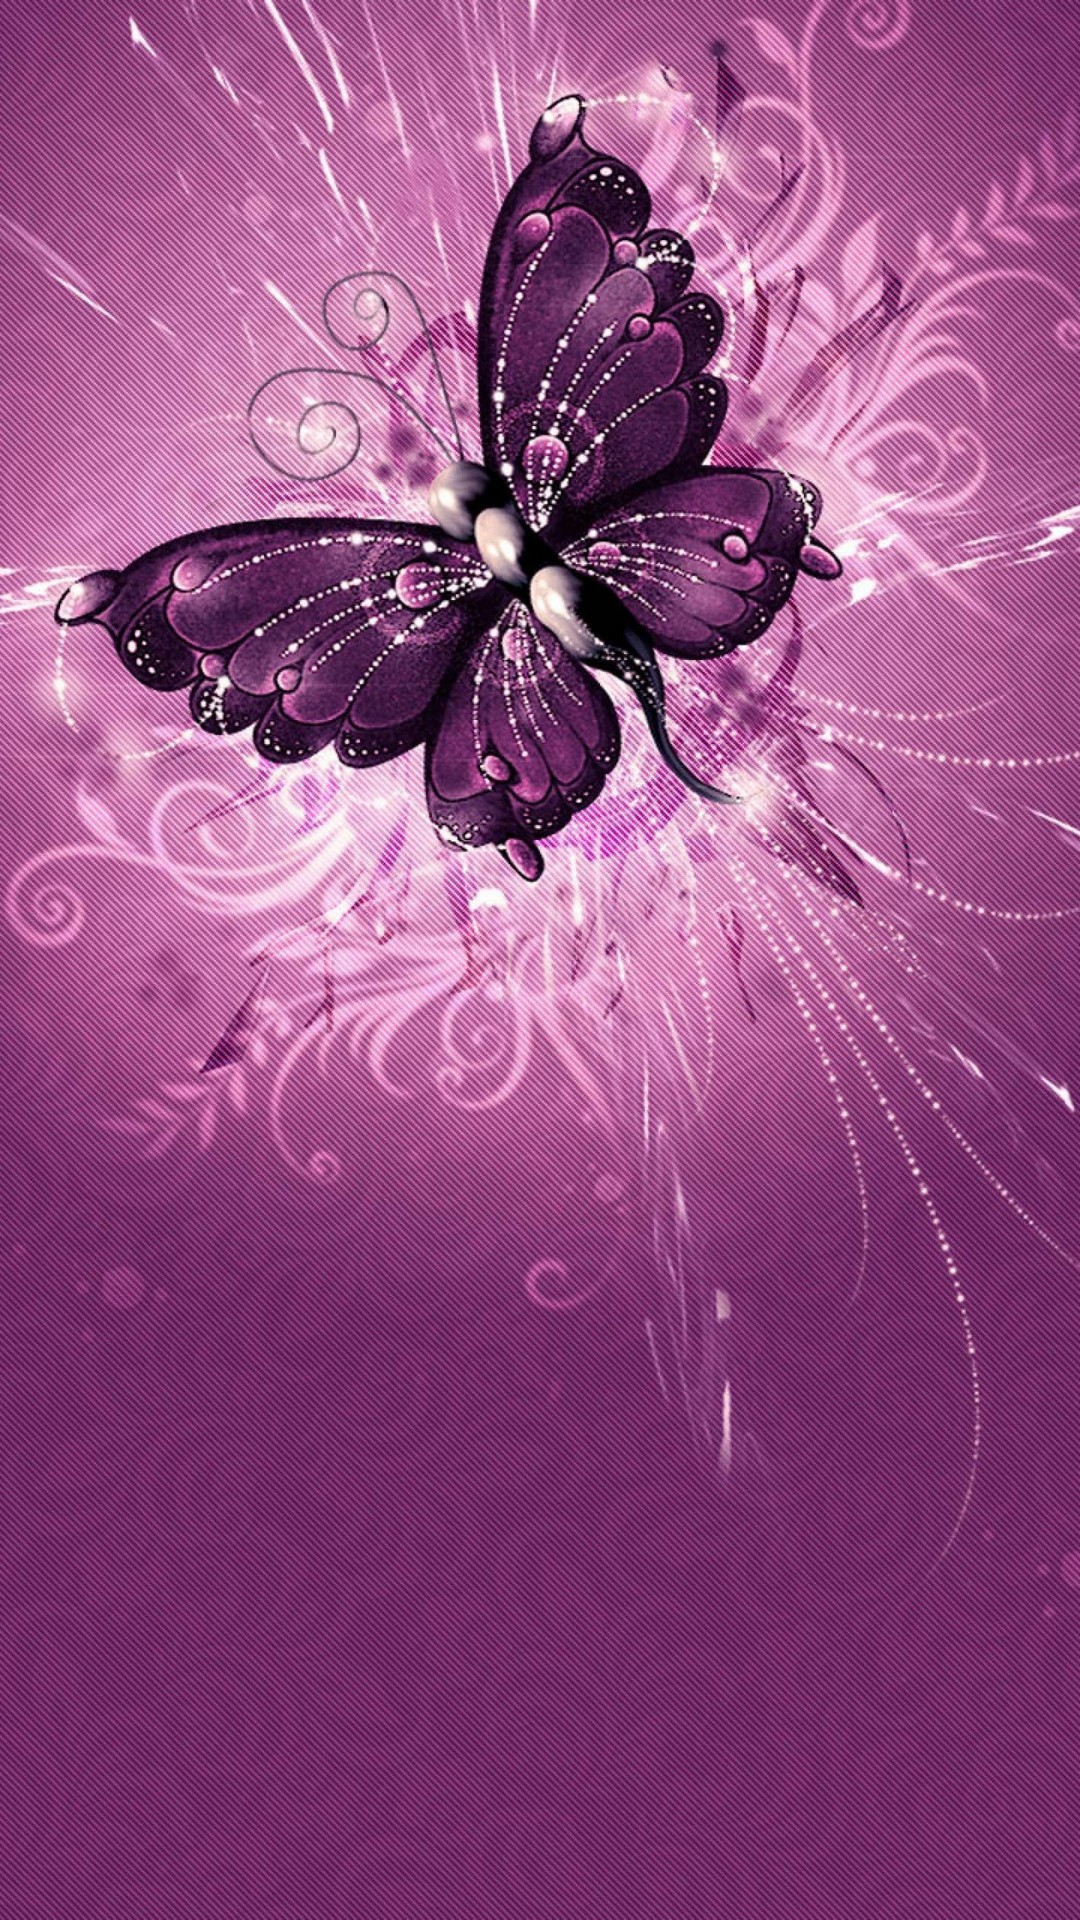 Purple Butterfly Wallpaper For Mobile Android | 2020 Cute ...